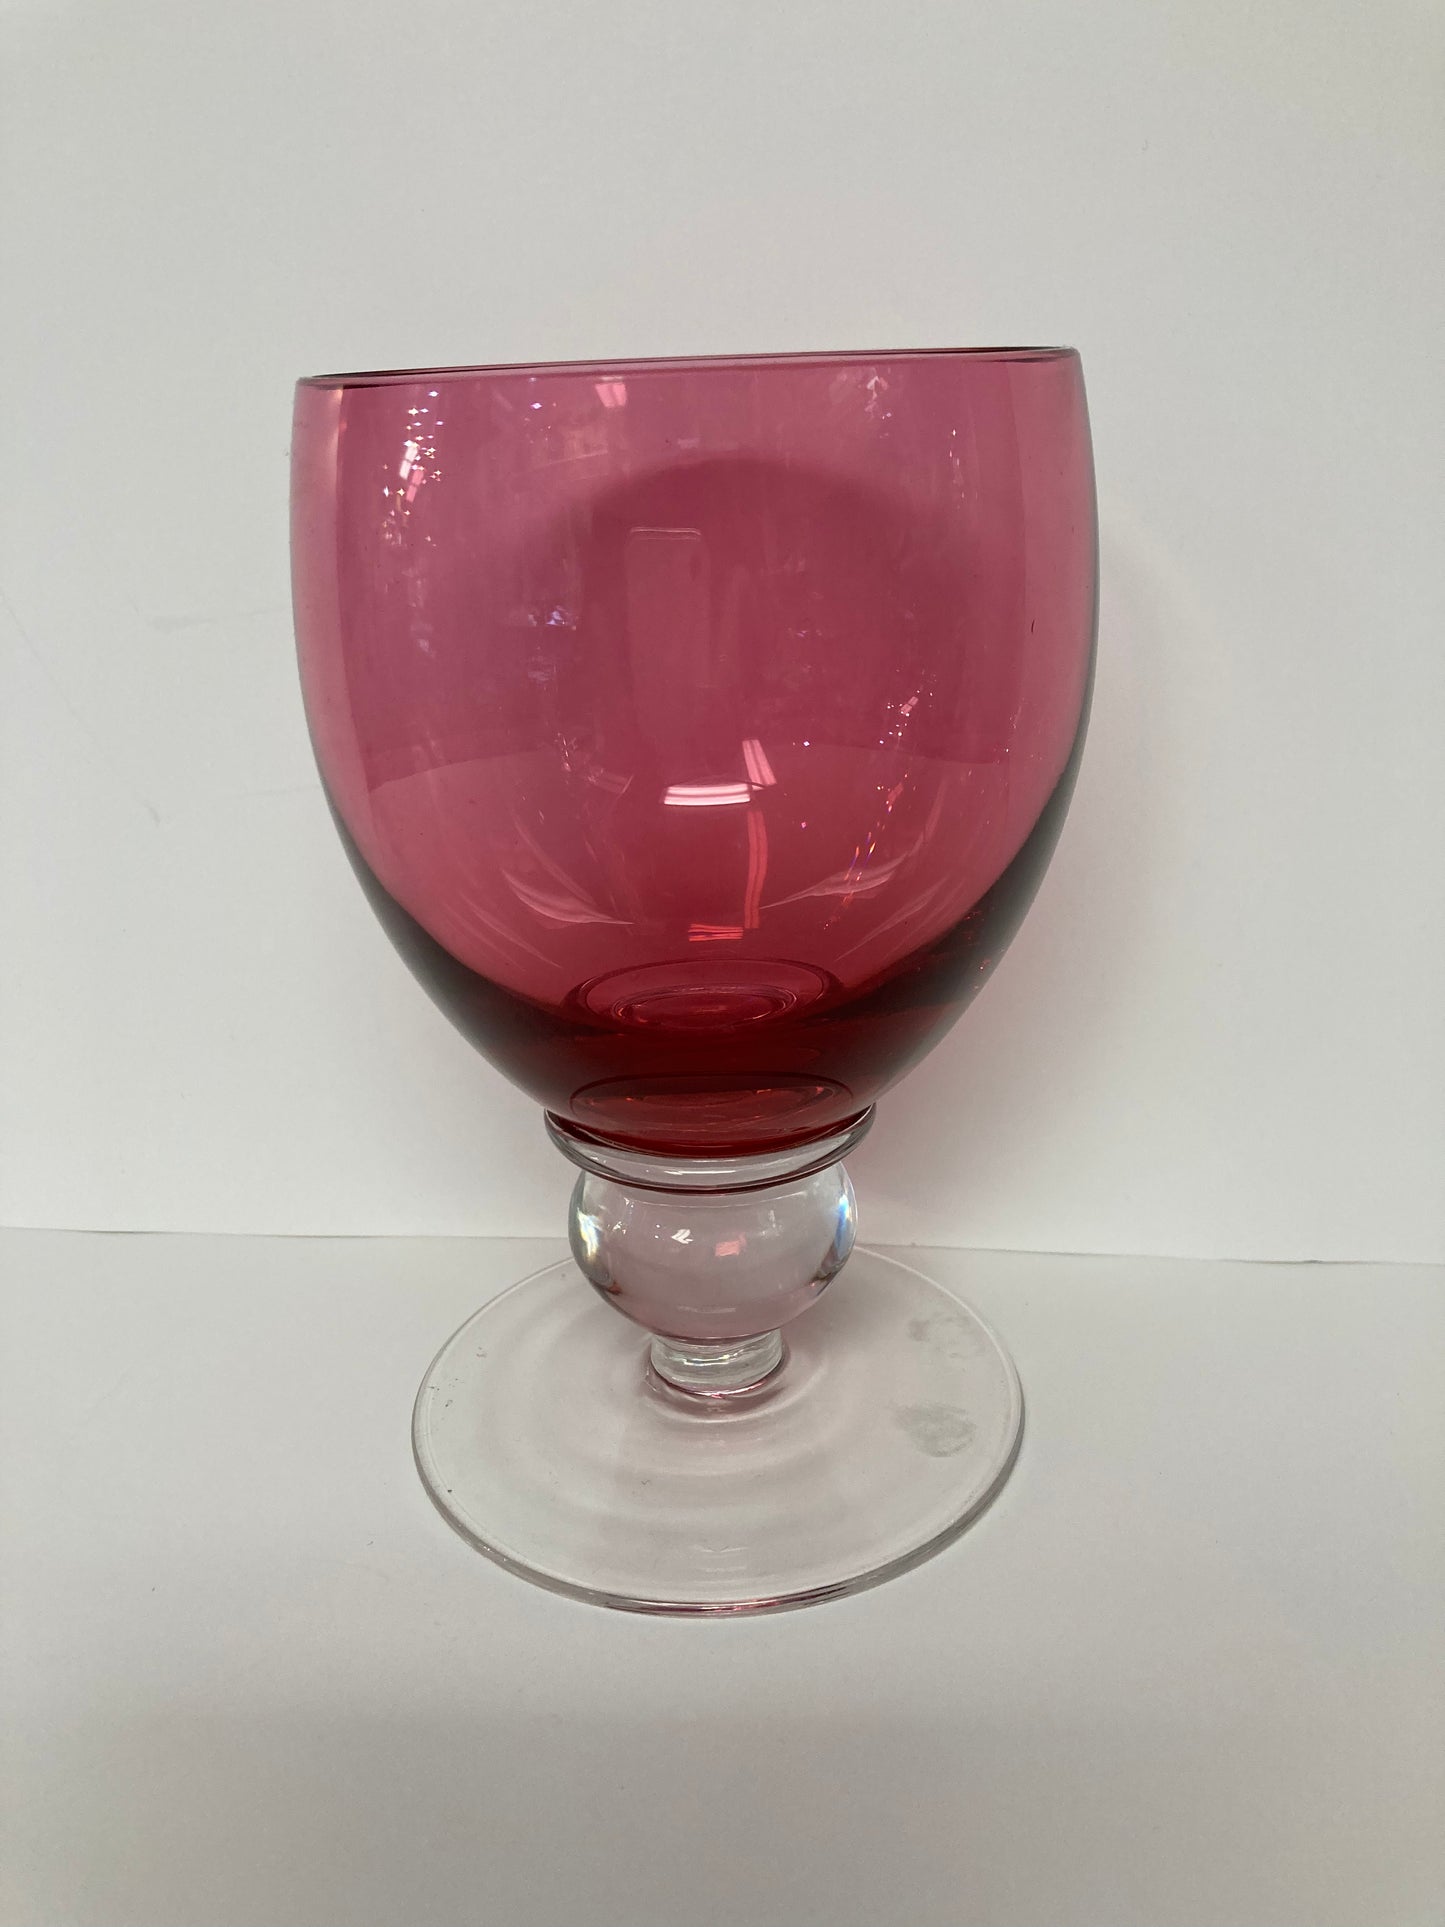 Crystal - cranberry glasses from Europe